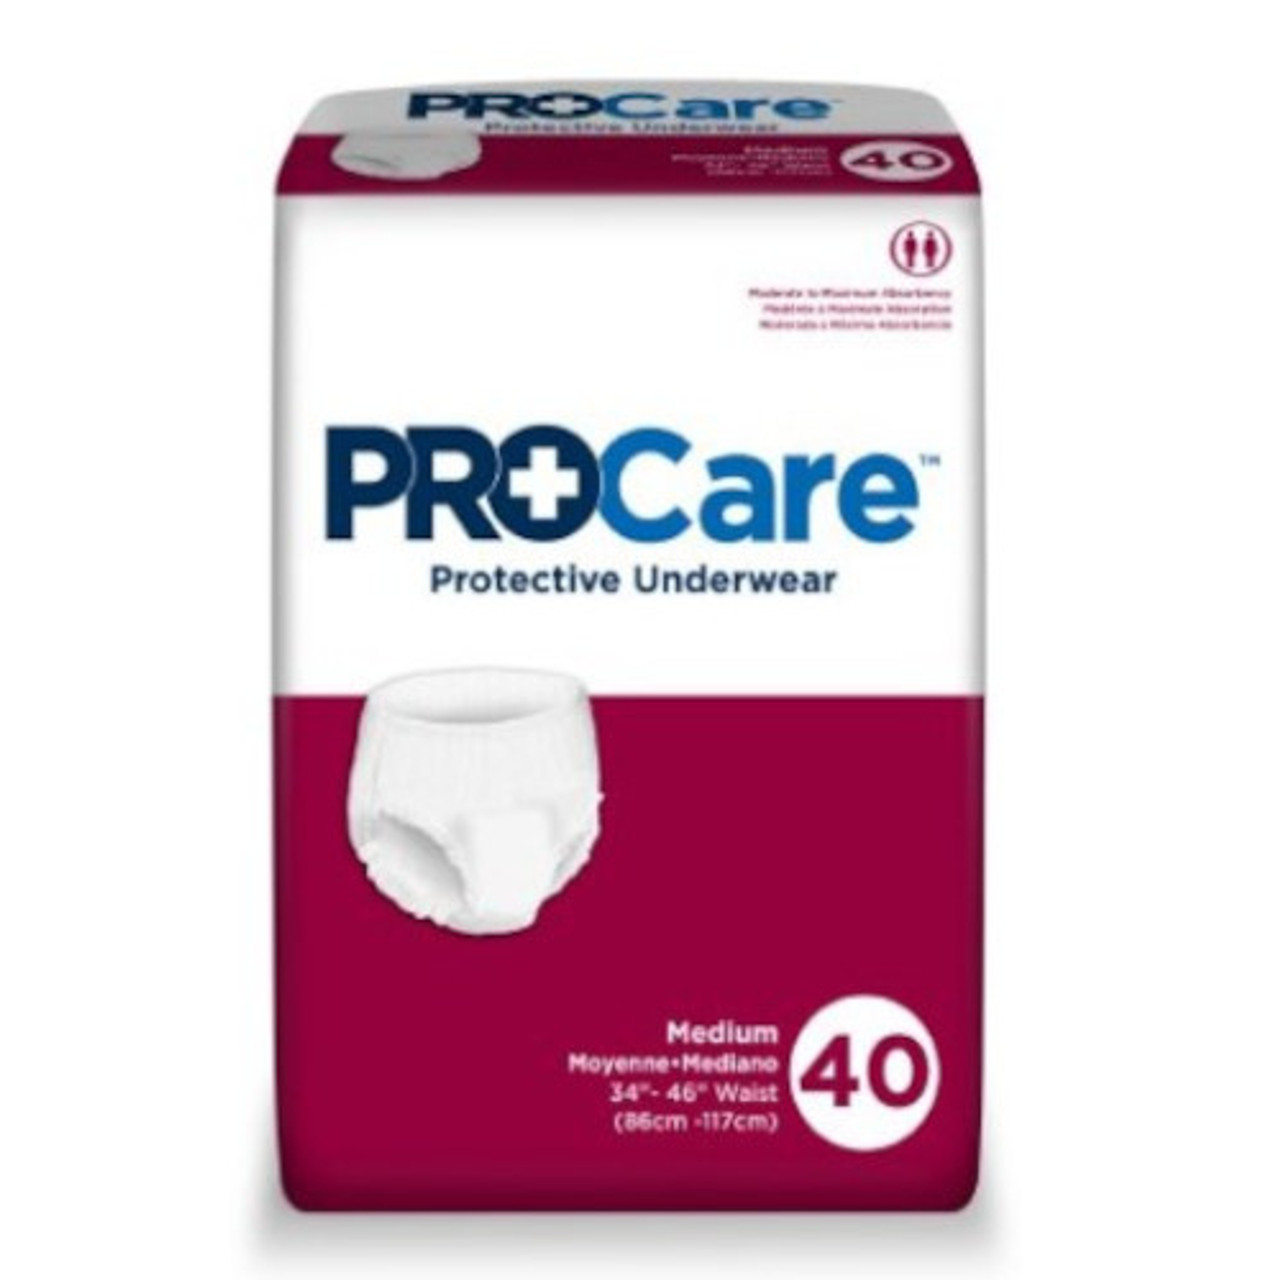  First Quality ProCare Breathable Adult Briefs - Medium